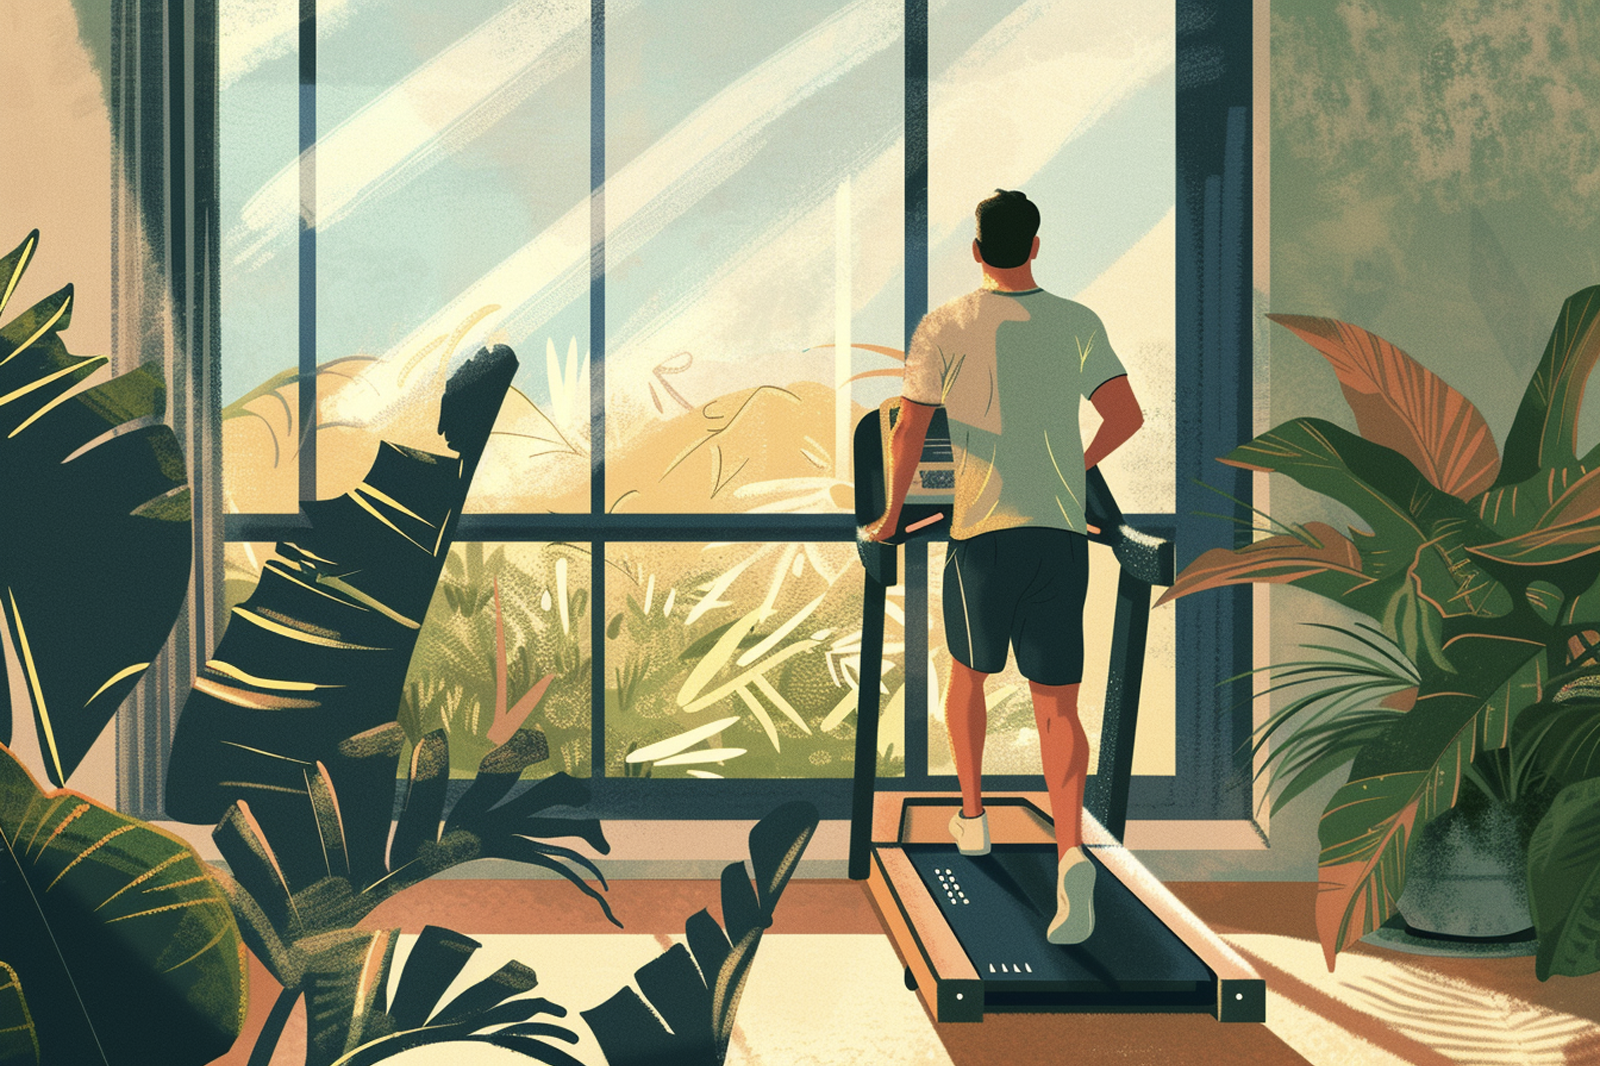 Illustration of a man running on a treadmill looking out the window.